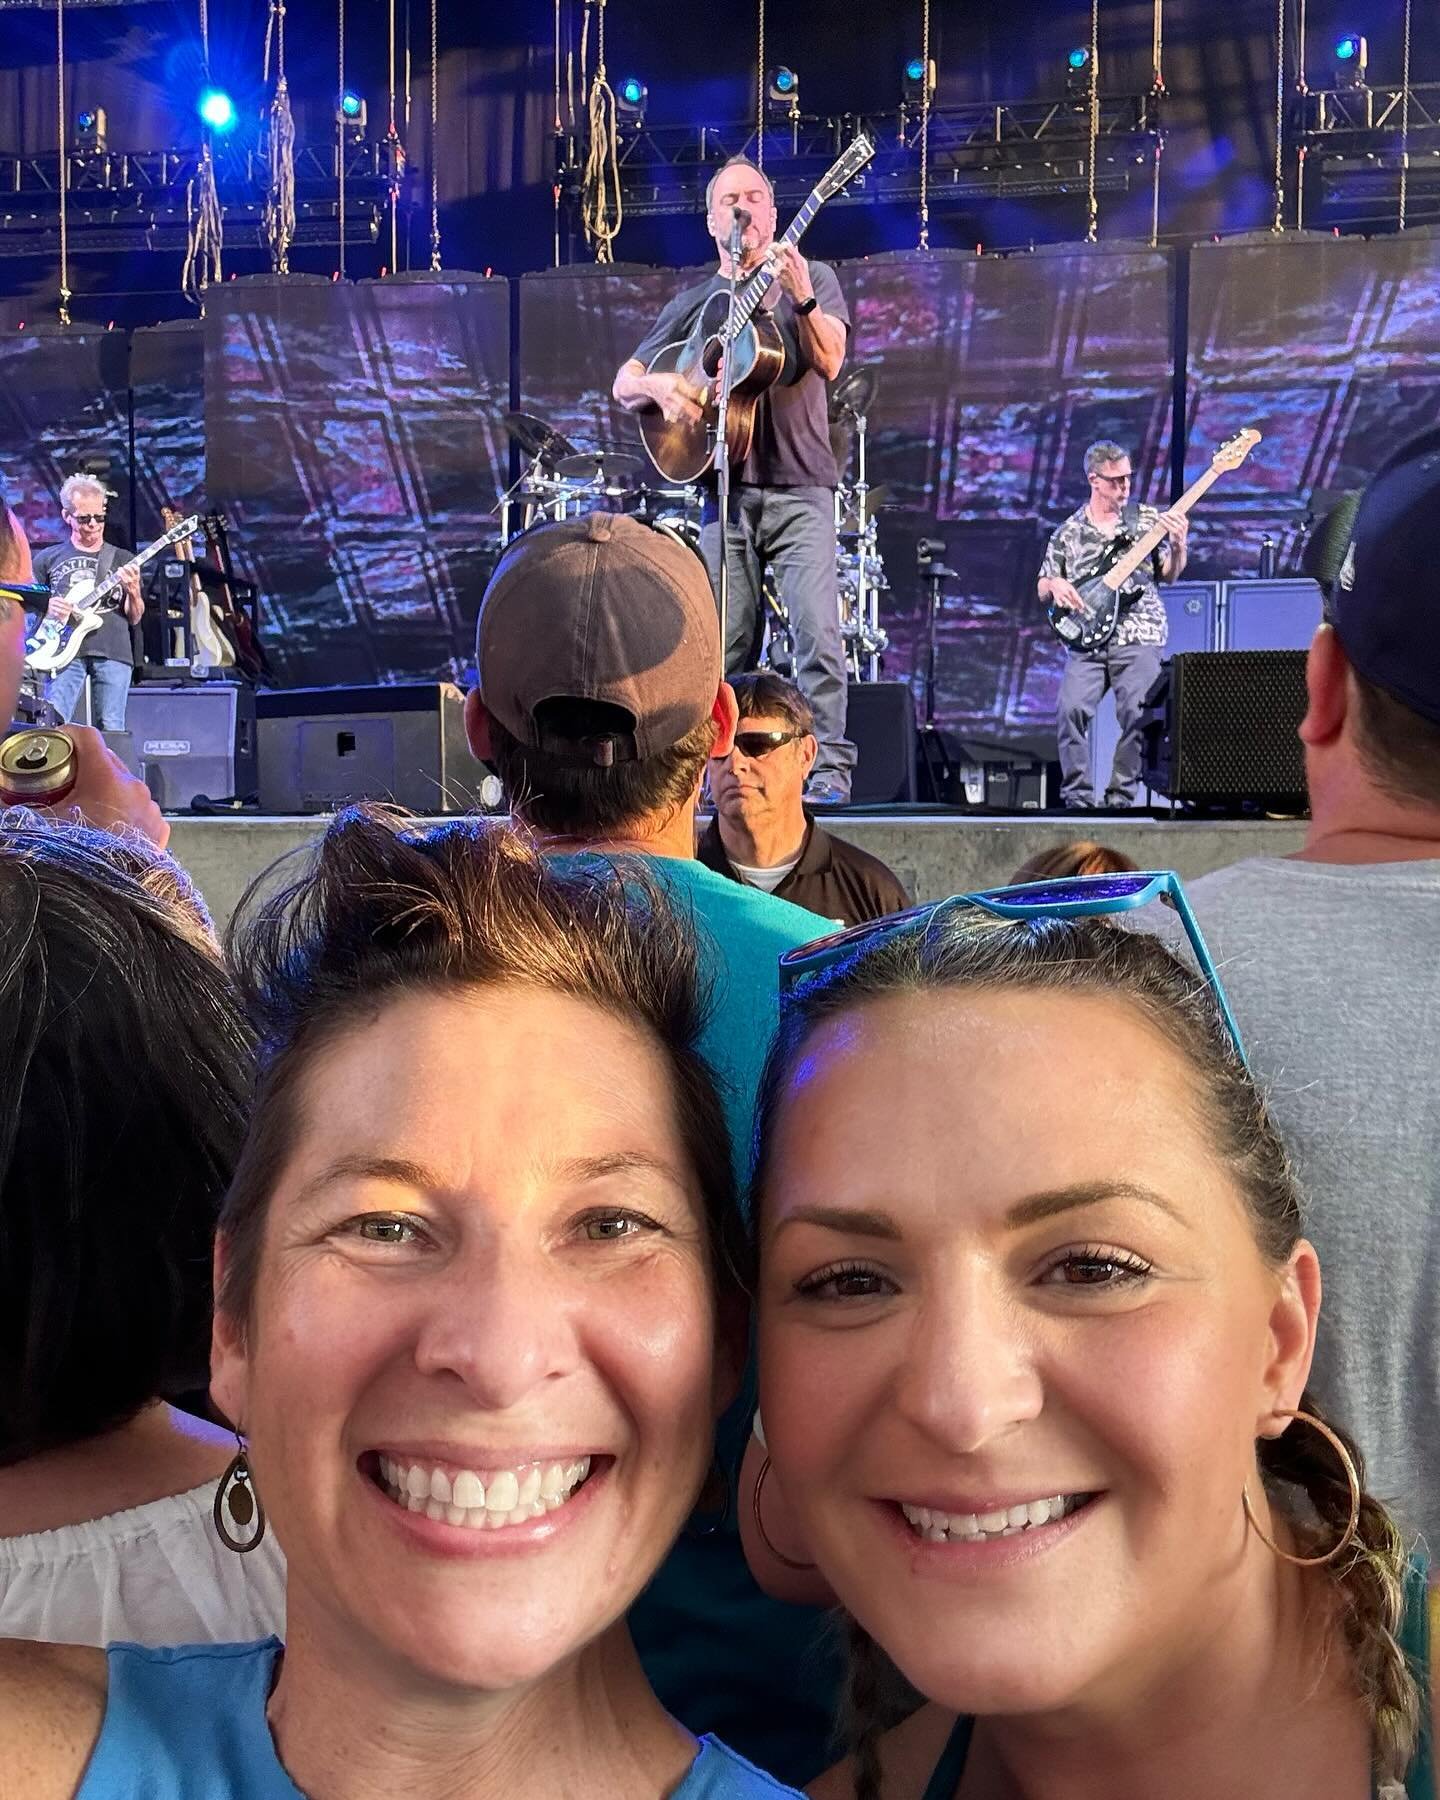 🎶💙😎
Epic N2 from second row center pit at @dailysplace seeing @davematthewsband with @thejesschardonnay Pinch me! The boys were on fire as always last night and Jess scored me the single pick that was handed out after the show! The messages in the